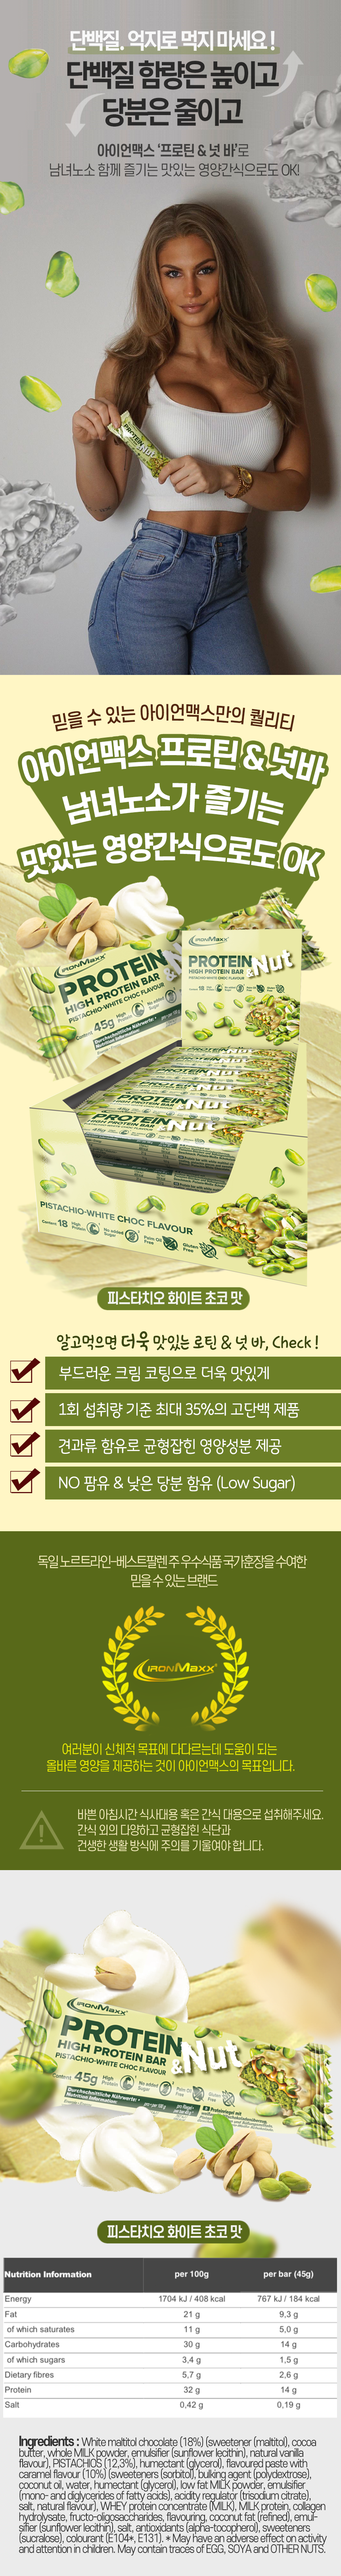 Protein-nut-bar-detail-2_154155.png